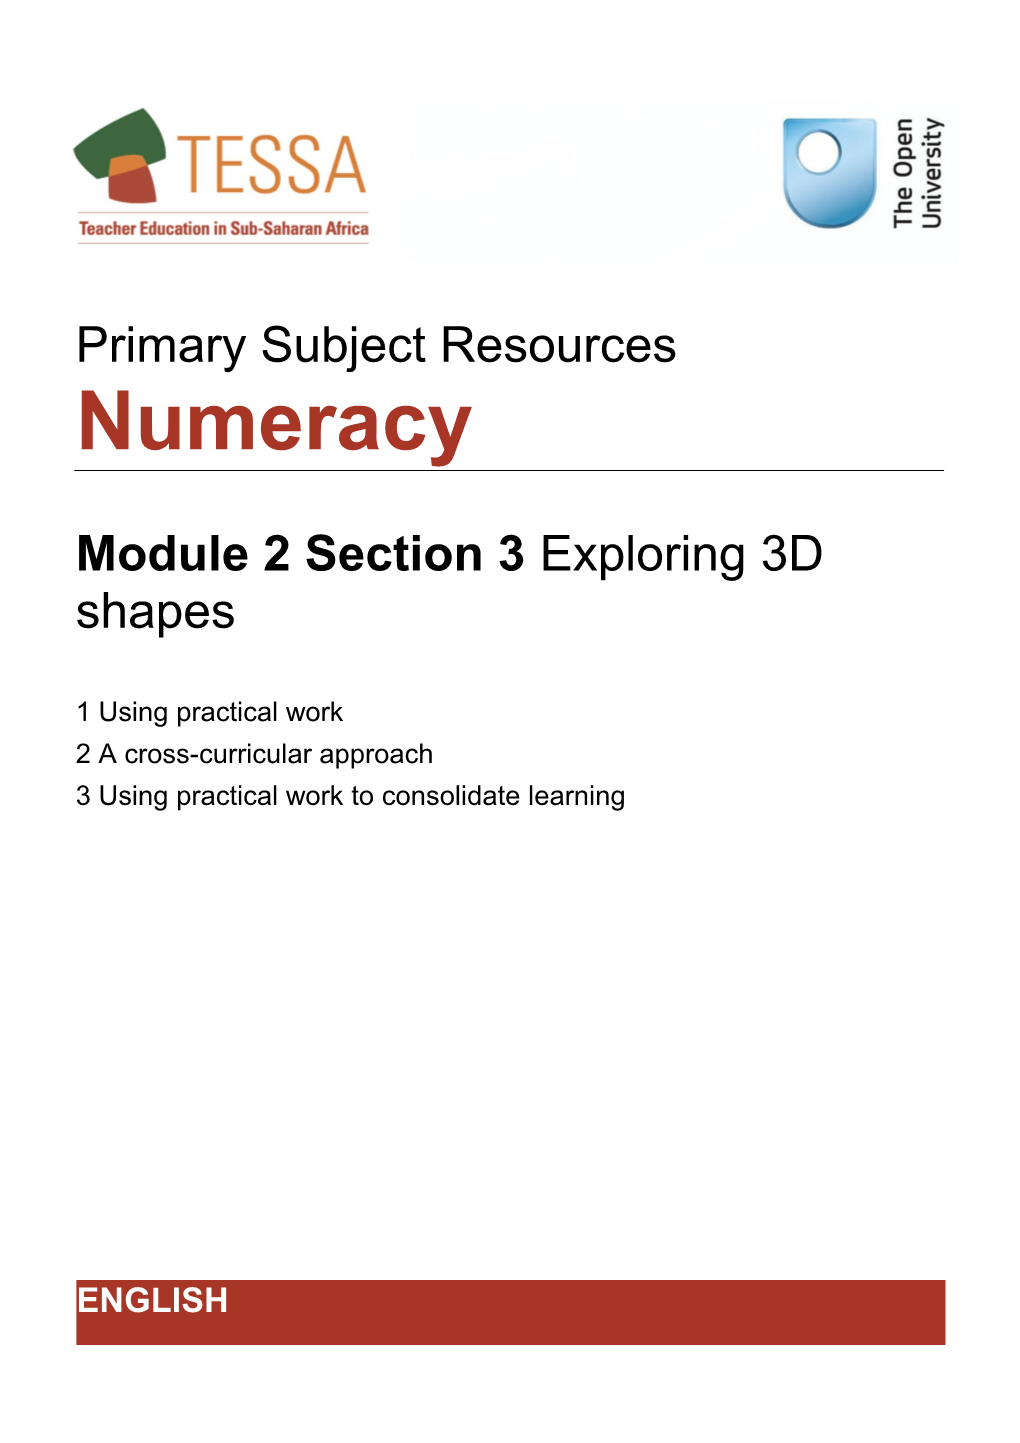 Section 3 : Exploring 3D Shapes